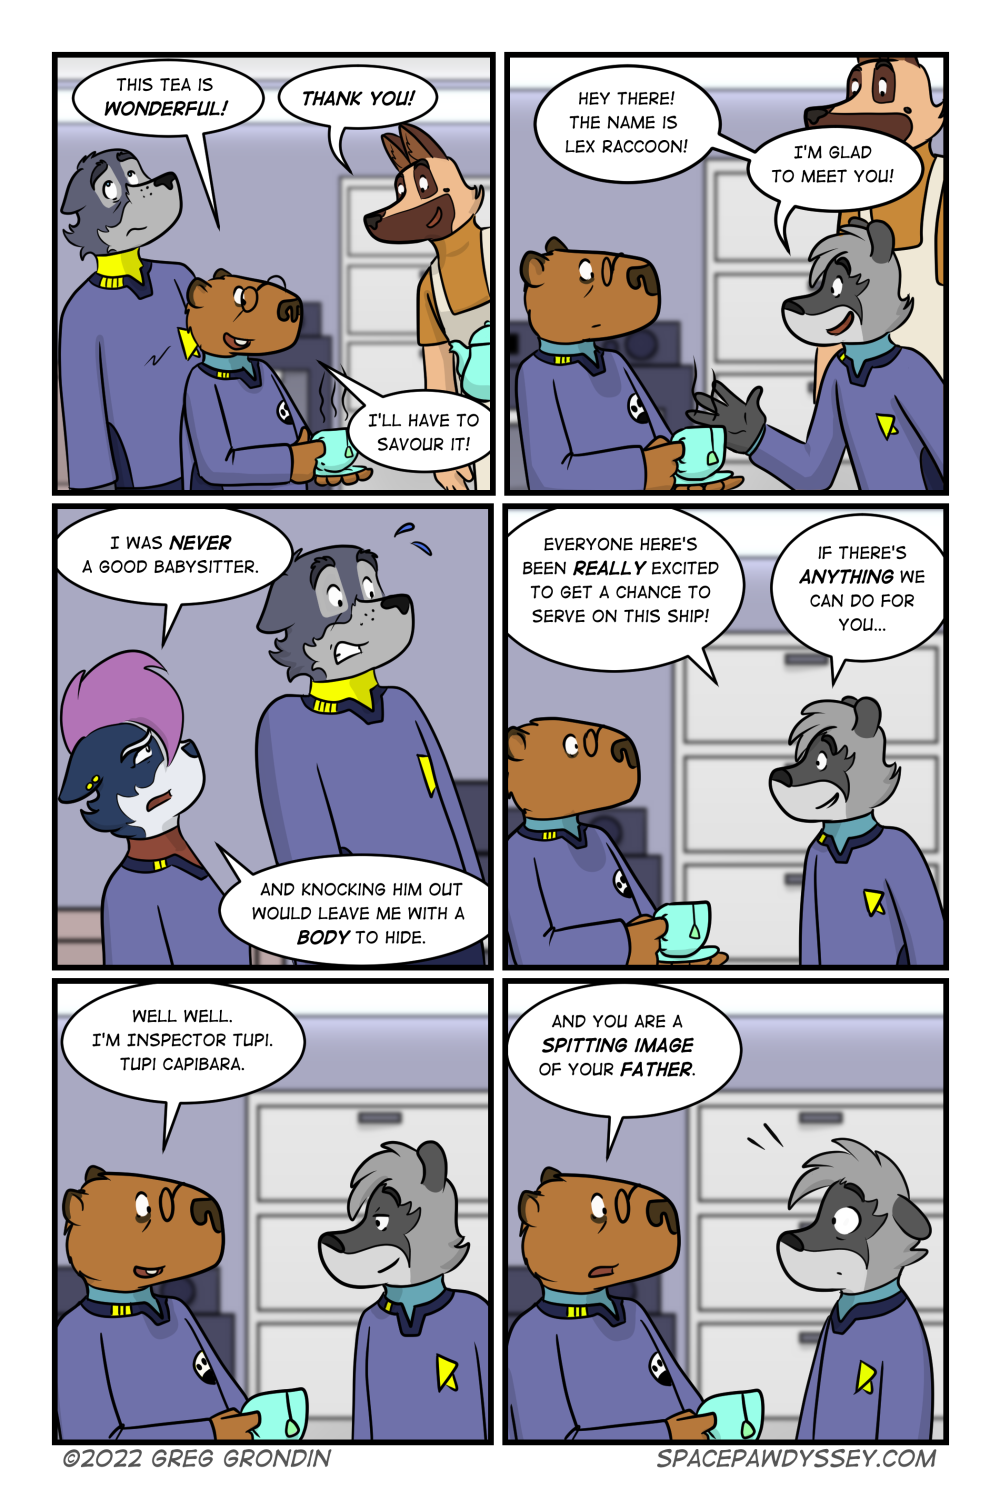 Space Pawdyssey #530